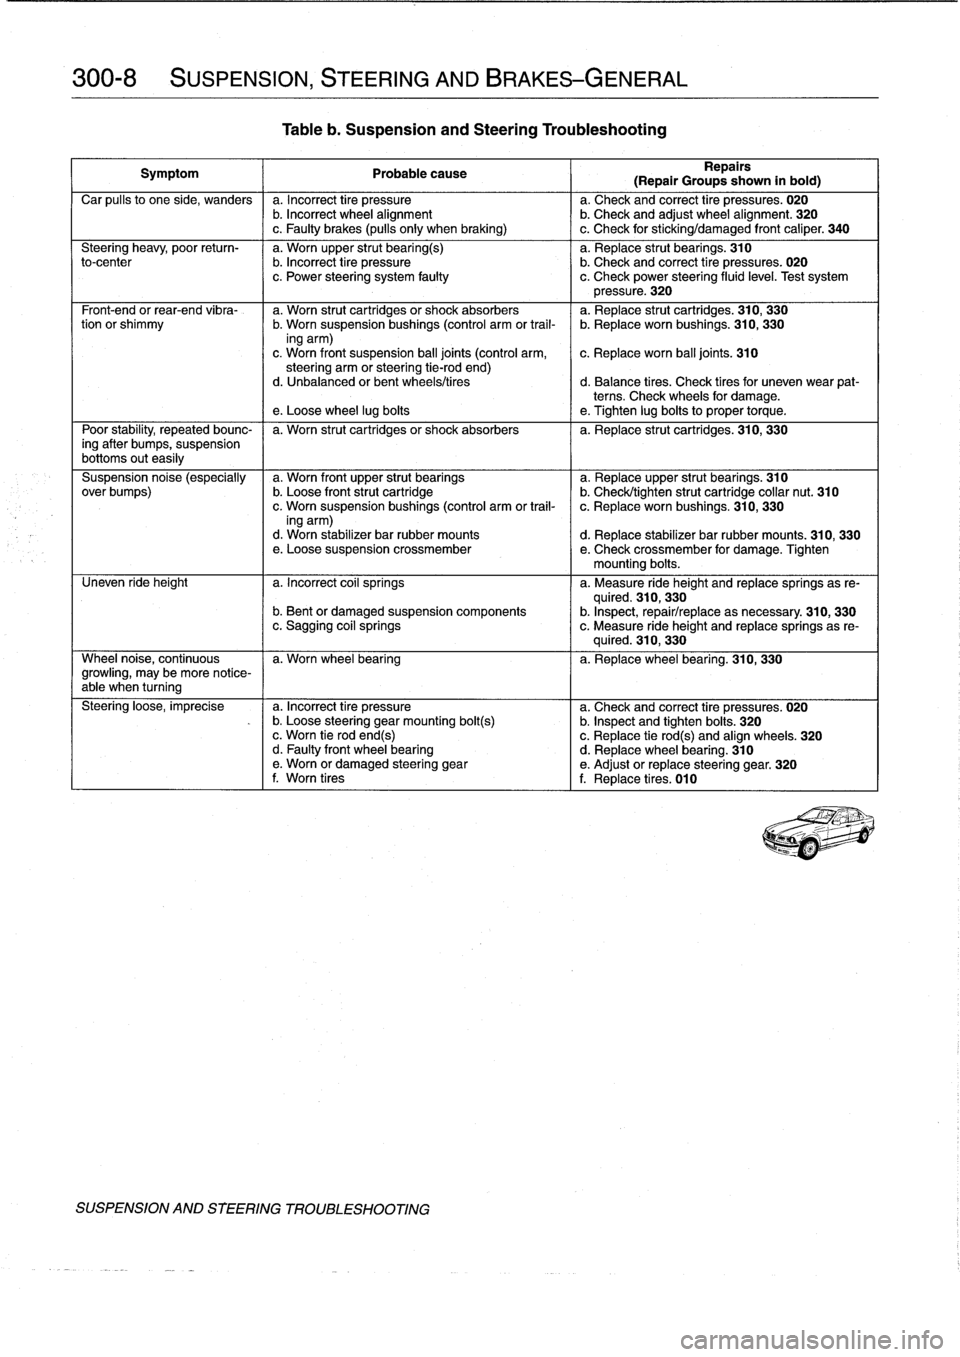 BMW 318i 1997 E36 Workshop Manual 
300-8

	

SUSPENSION,
STEERING
AND
BRAKES-GENERAL

Tableb
.
Suspension
and
Steering
Troubleshooting

Symptom

	

1

	

Probable
cause
Repairs
(Repair
Groups
shown
in
bold)

Car
pulís
to
one
side,
wa